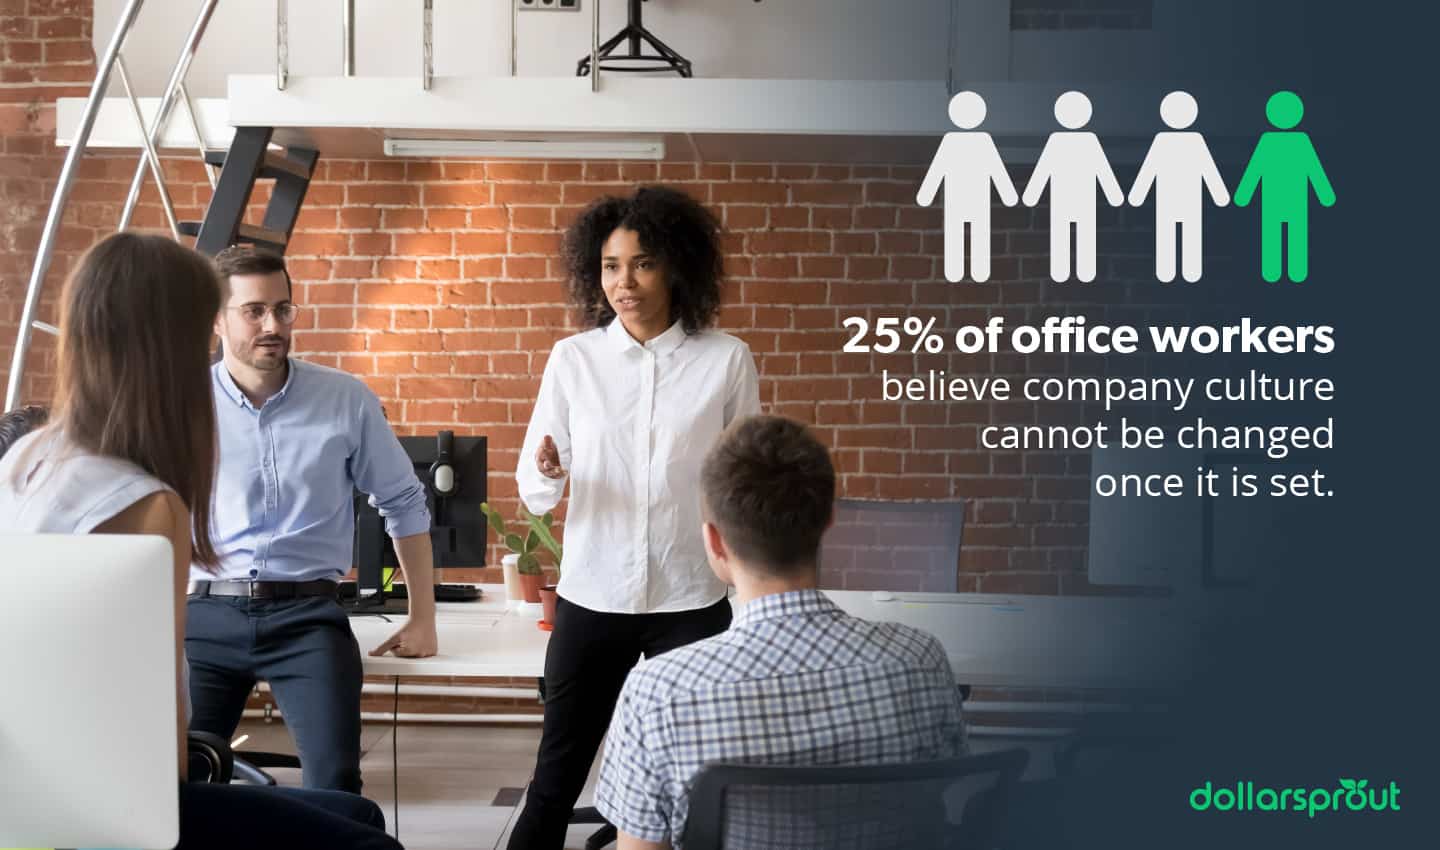 Office culture cannot be changed once set statistic